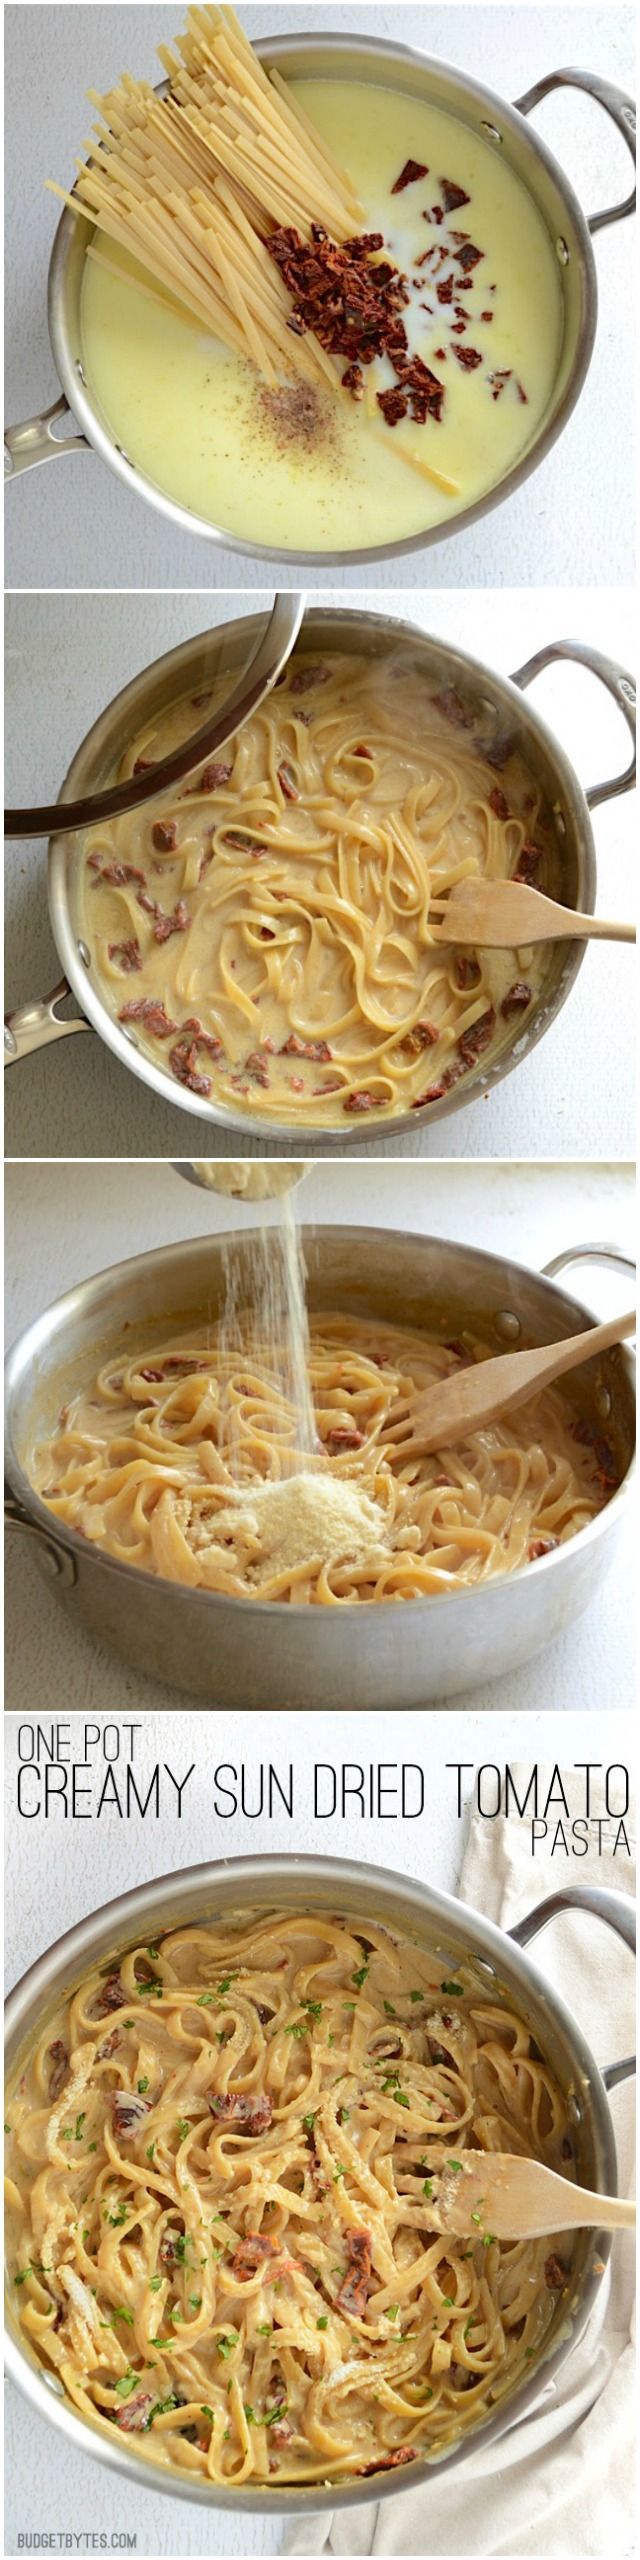 This incredibly fast and easy Creamy Sun Dried Tomato Pasta cooks in 30 minutes and uses just one pot. Make dinner delicious any